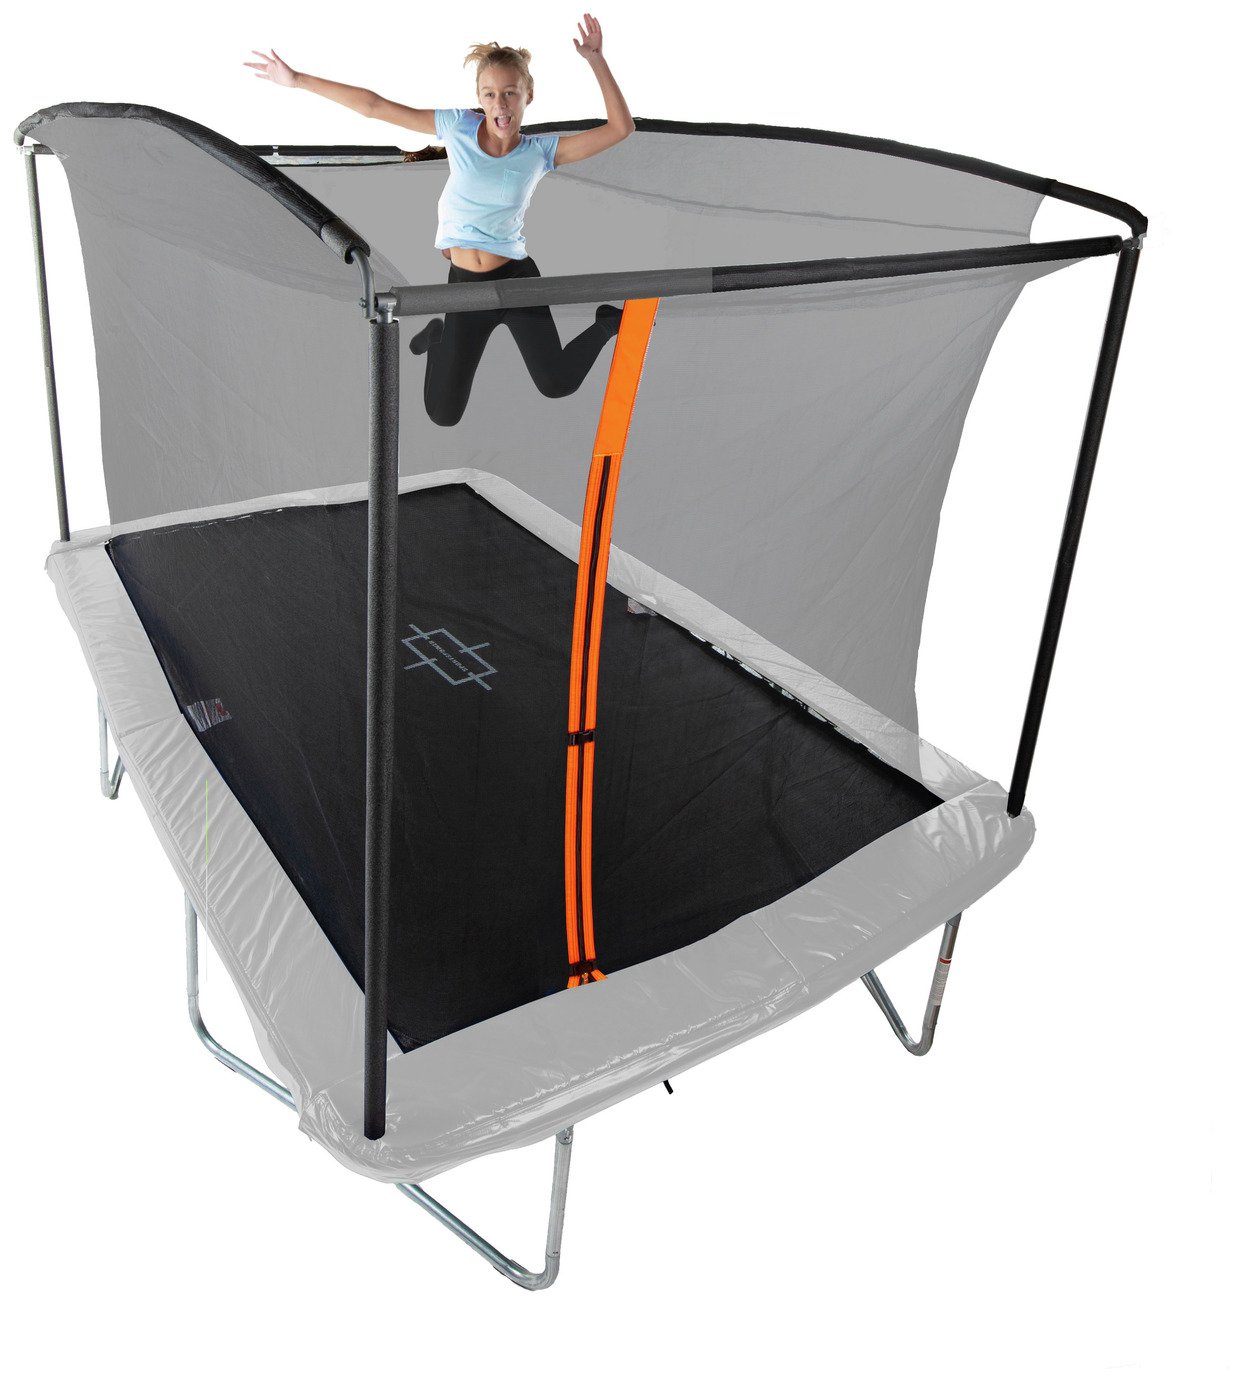 Sportspower 8ft x 12ft Outdoor Kids Trampoline and Enclosure review